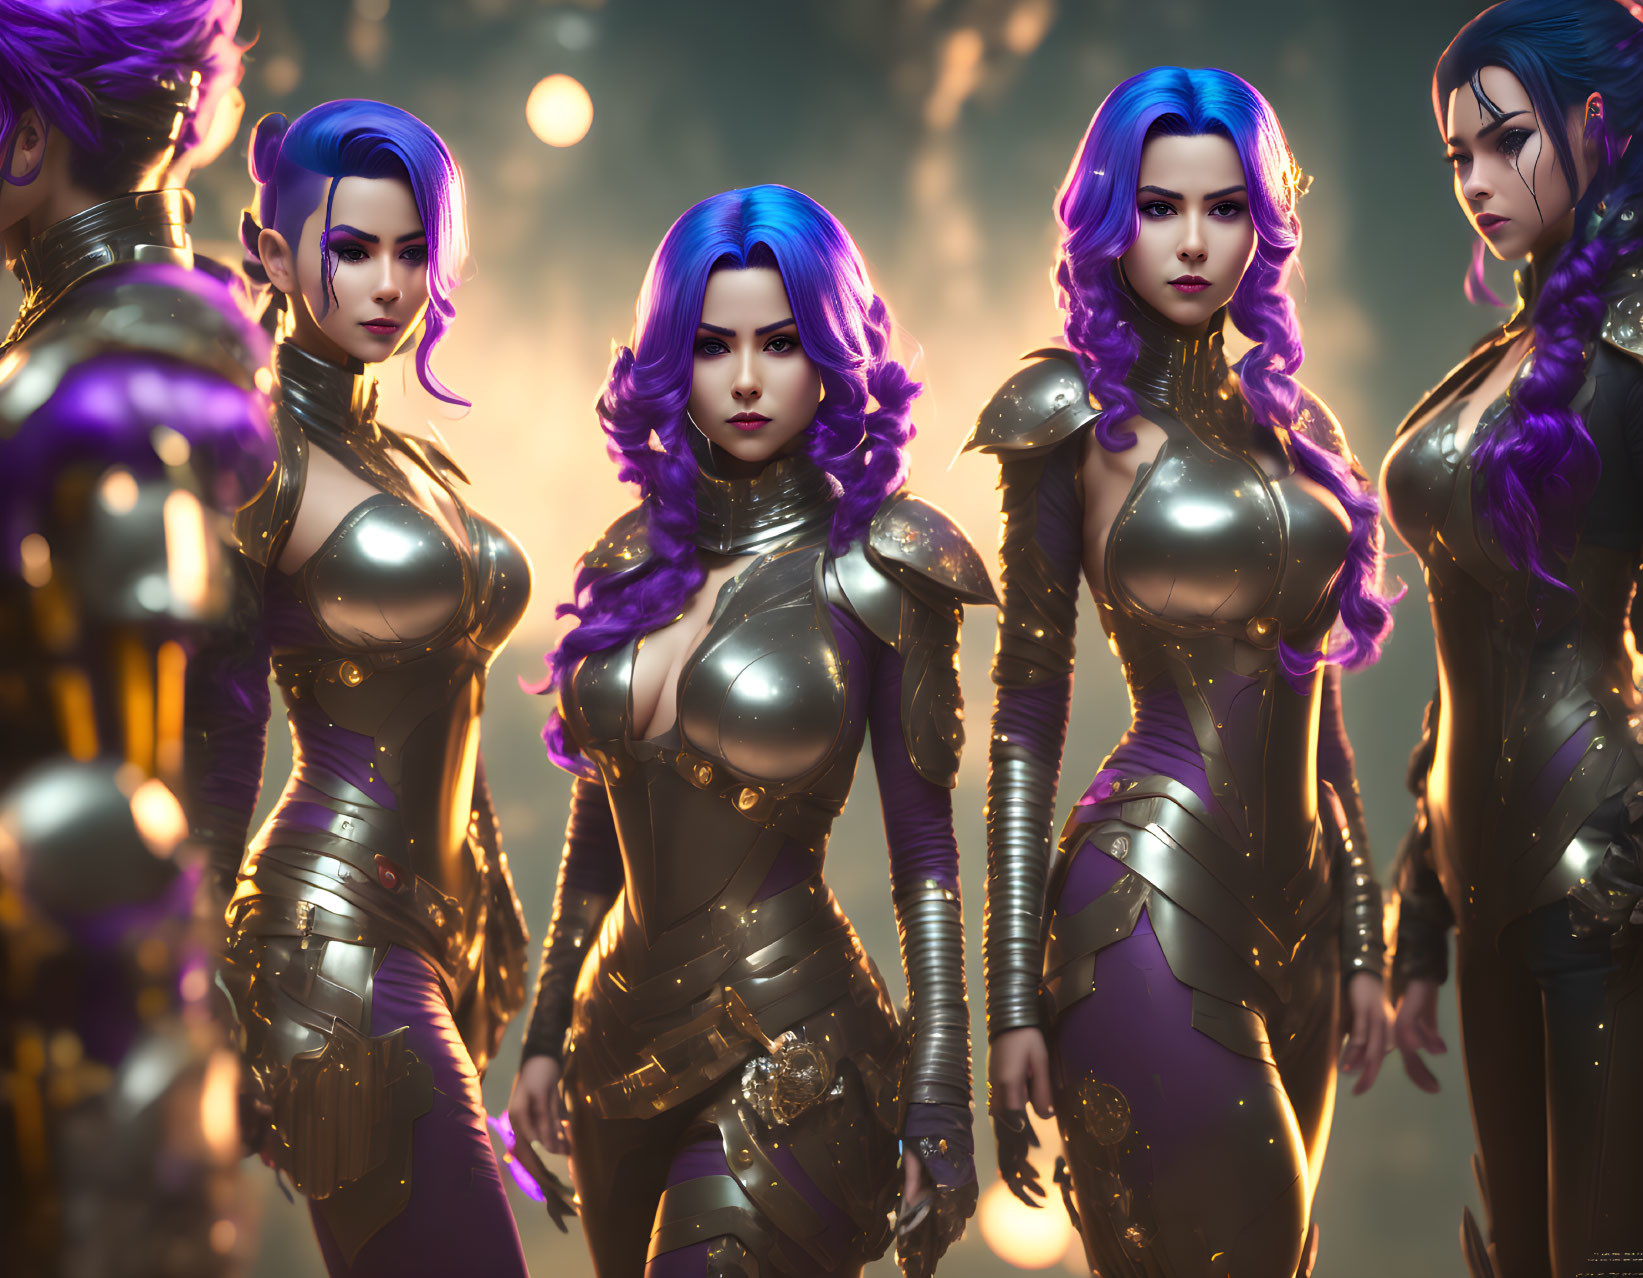 Four Female Warriors in Futuristic Armor with Purple Hair Stand United